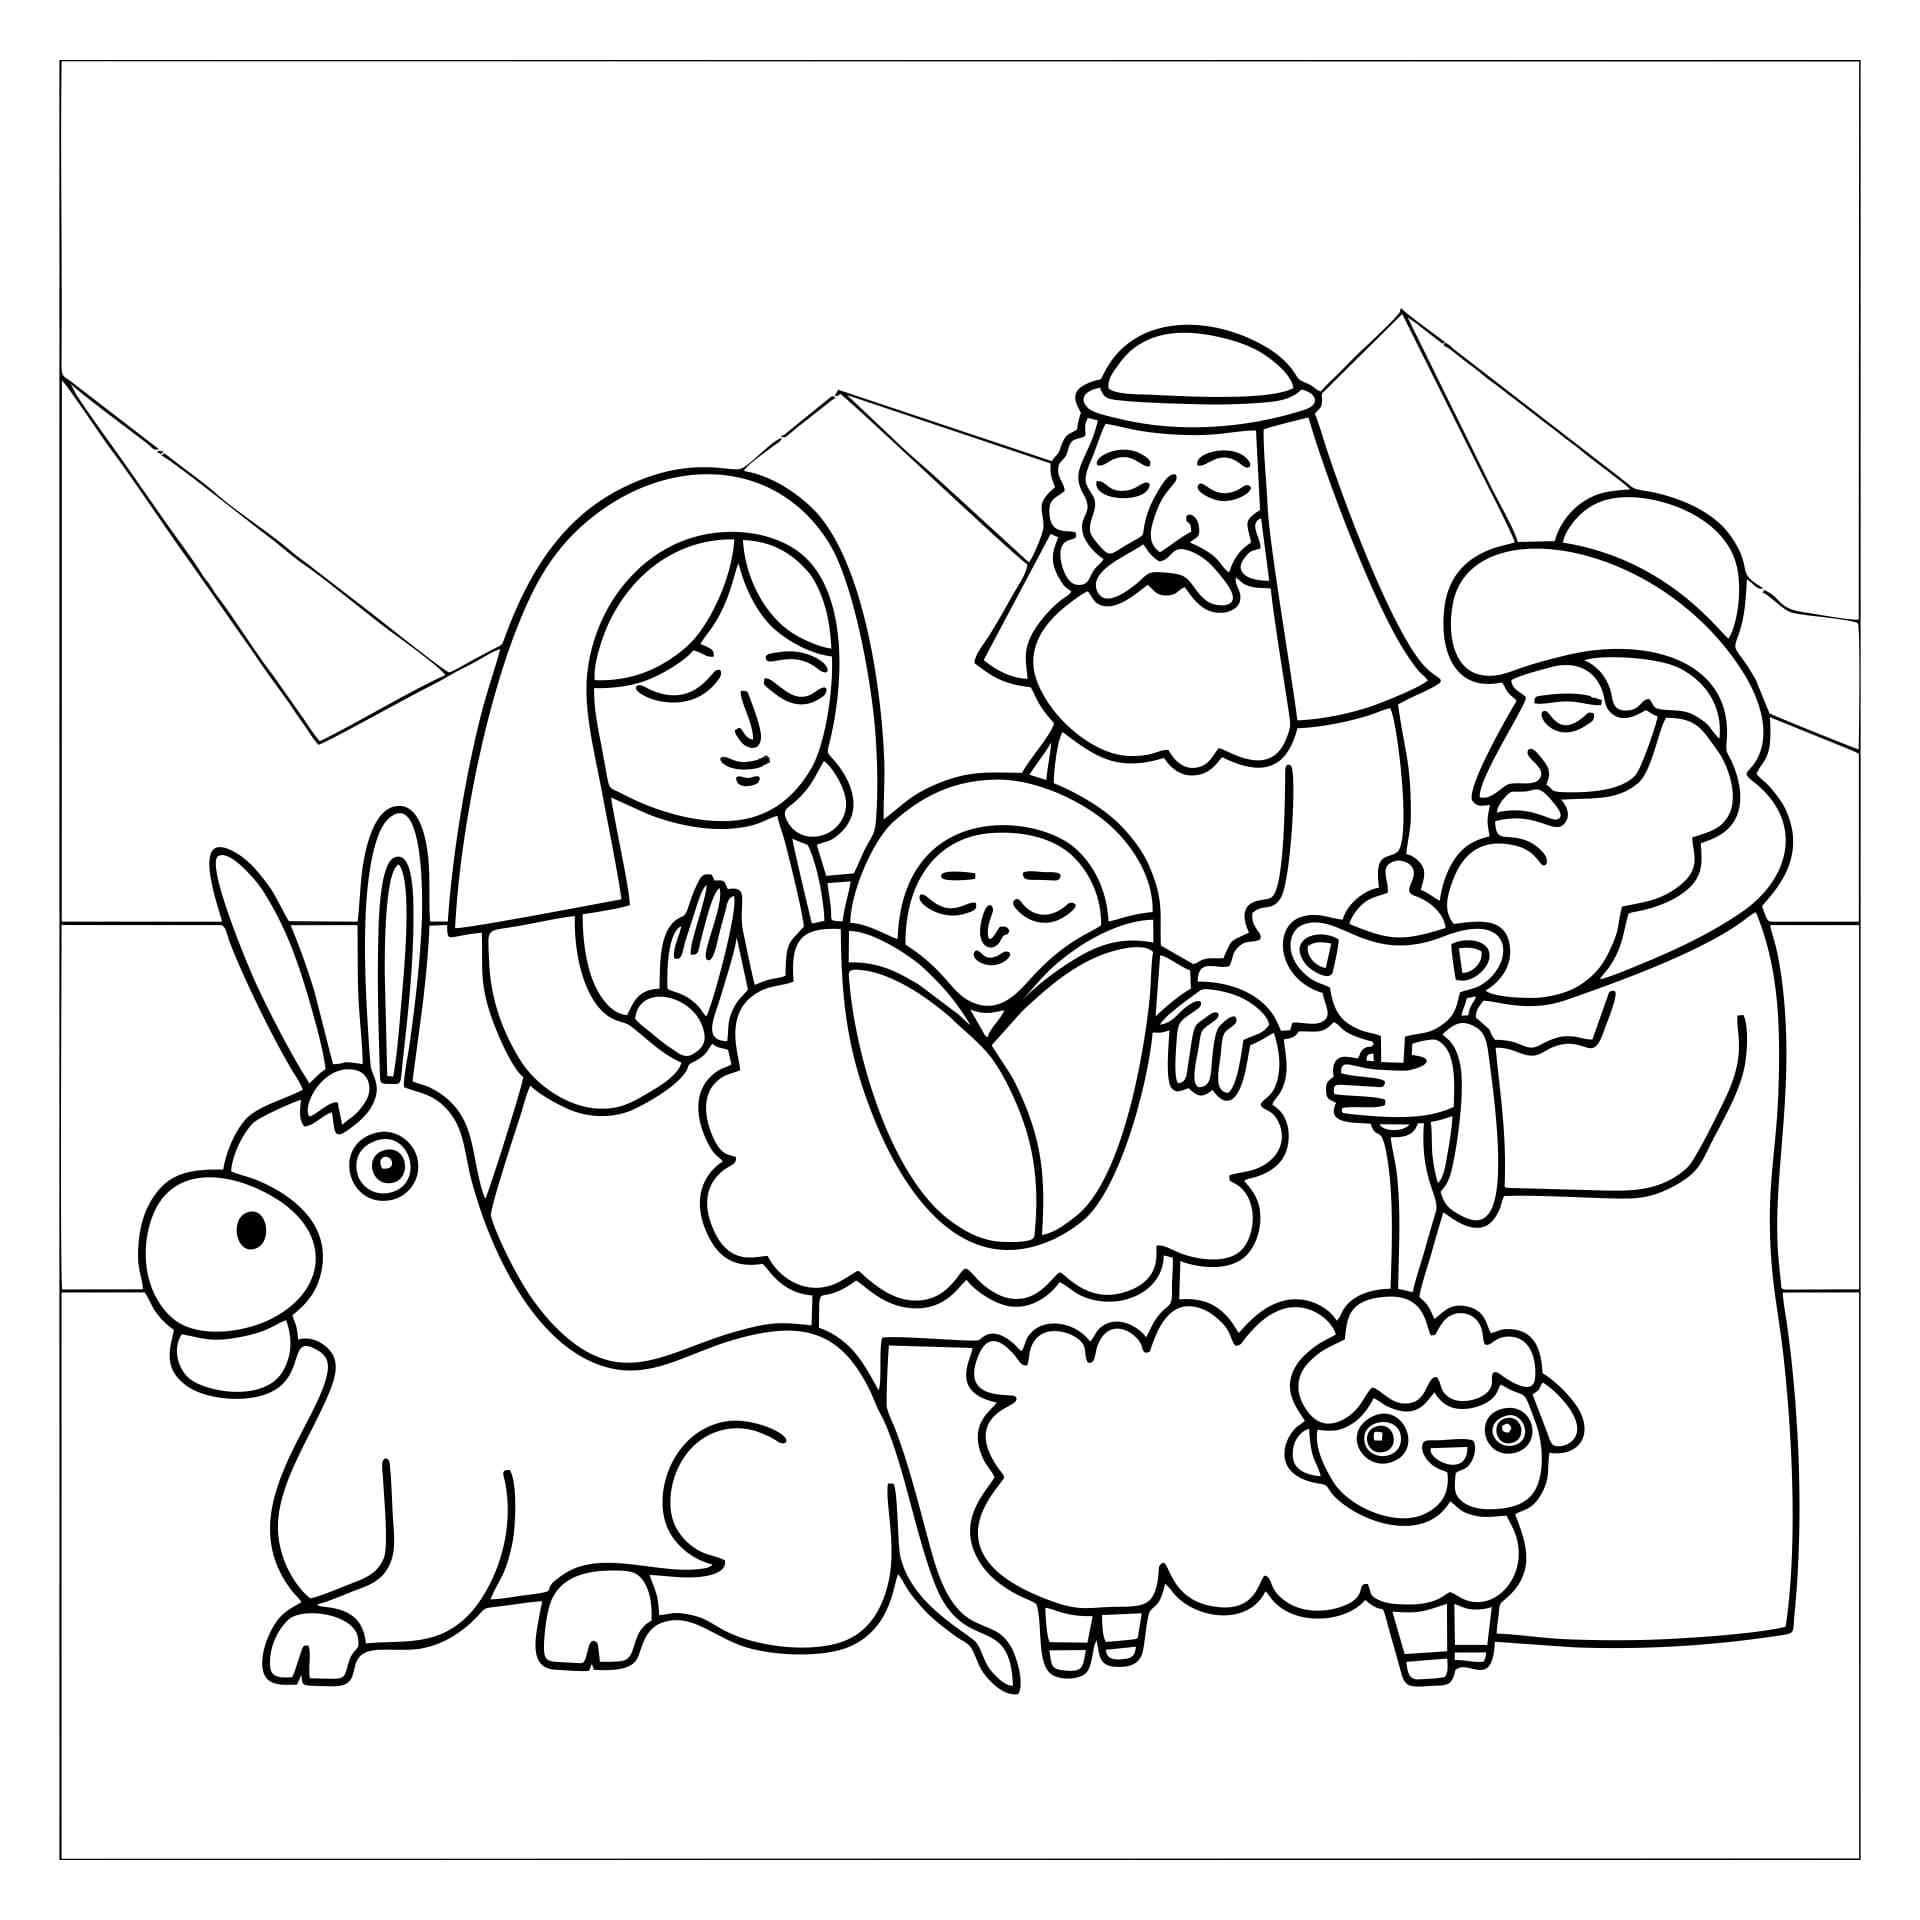 The Holy Family Surrounded The Baby